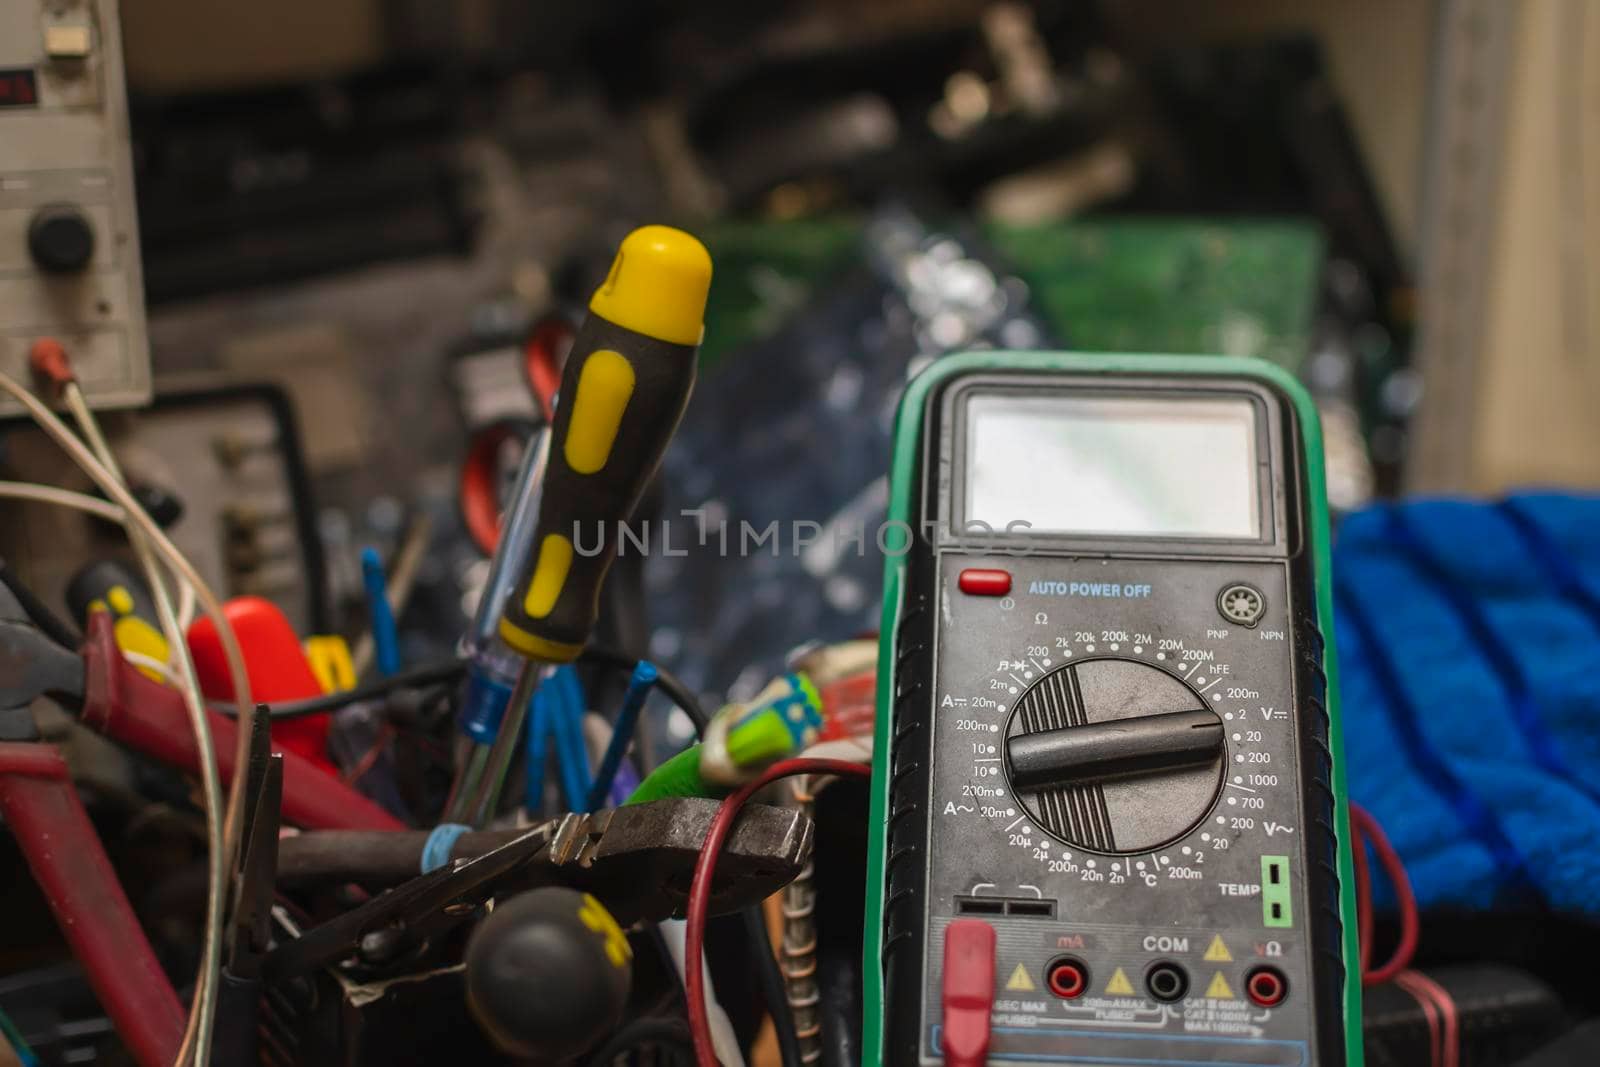 measurement scale on a multimeter, tester of electronic parts, components against the background of screwdrivers, tools, printed circuit boards, circuits and broken equipment in a repair service center